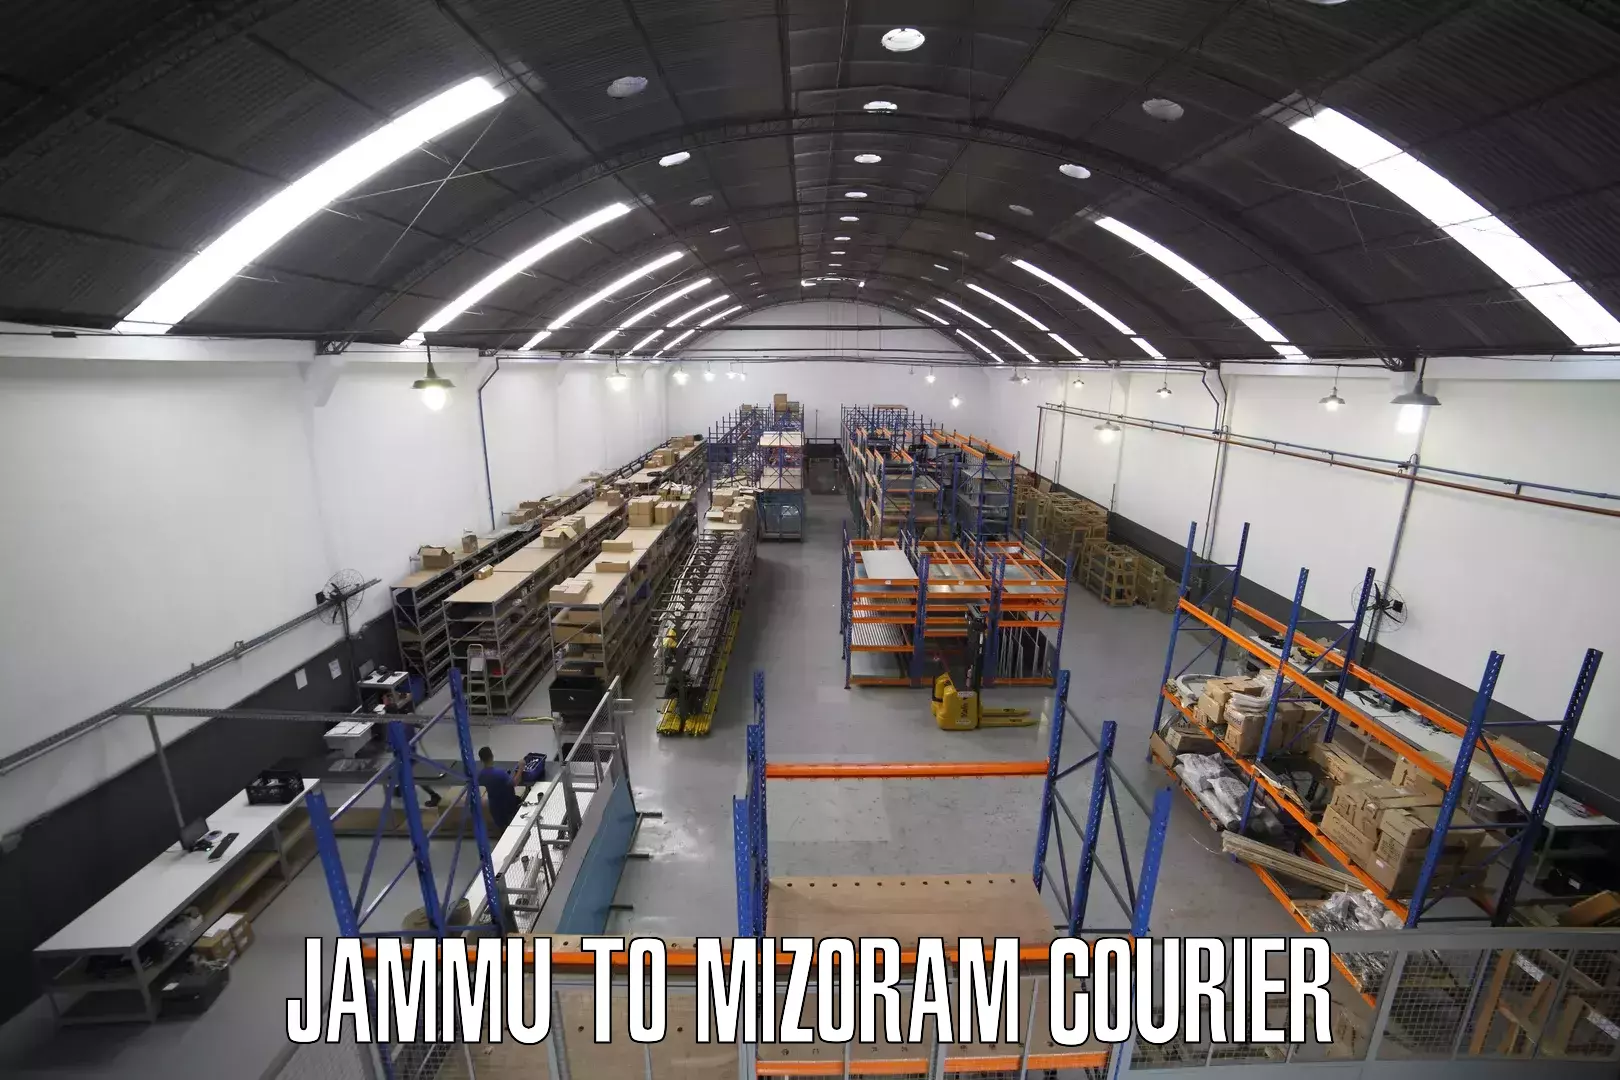 State-of-the-art courier technology Jammu to Siaha